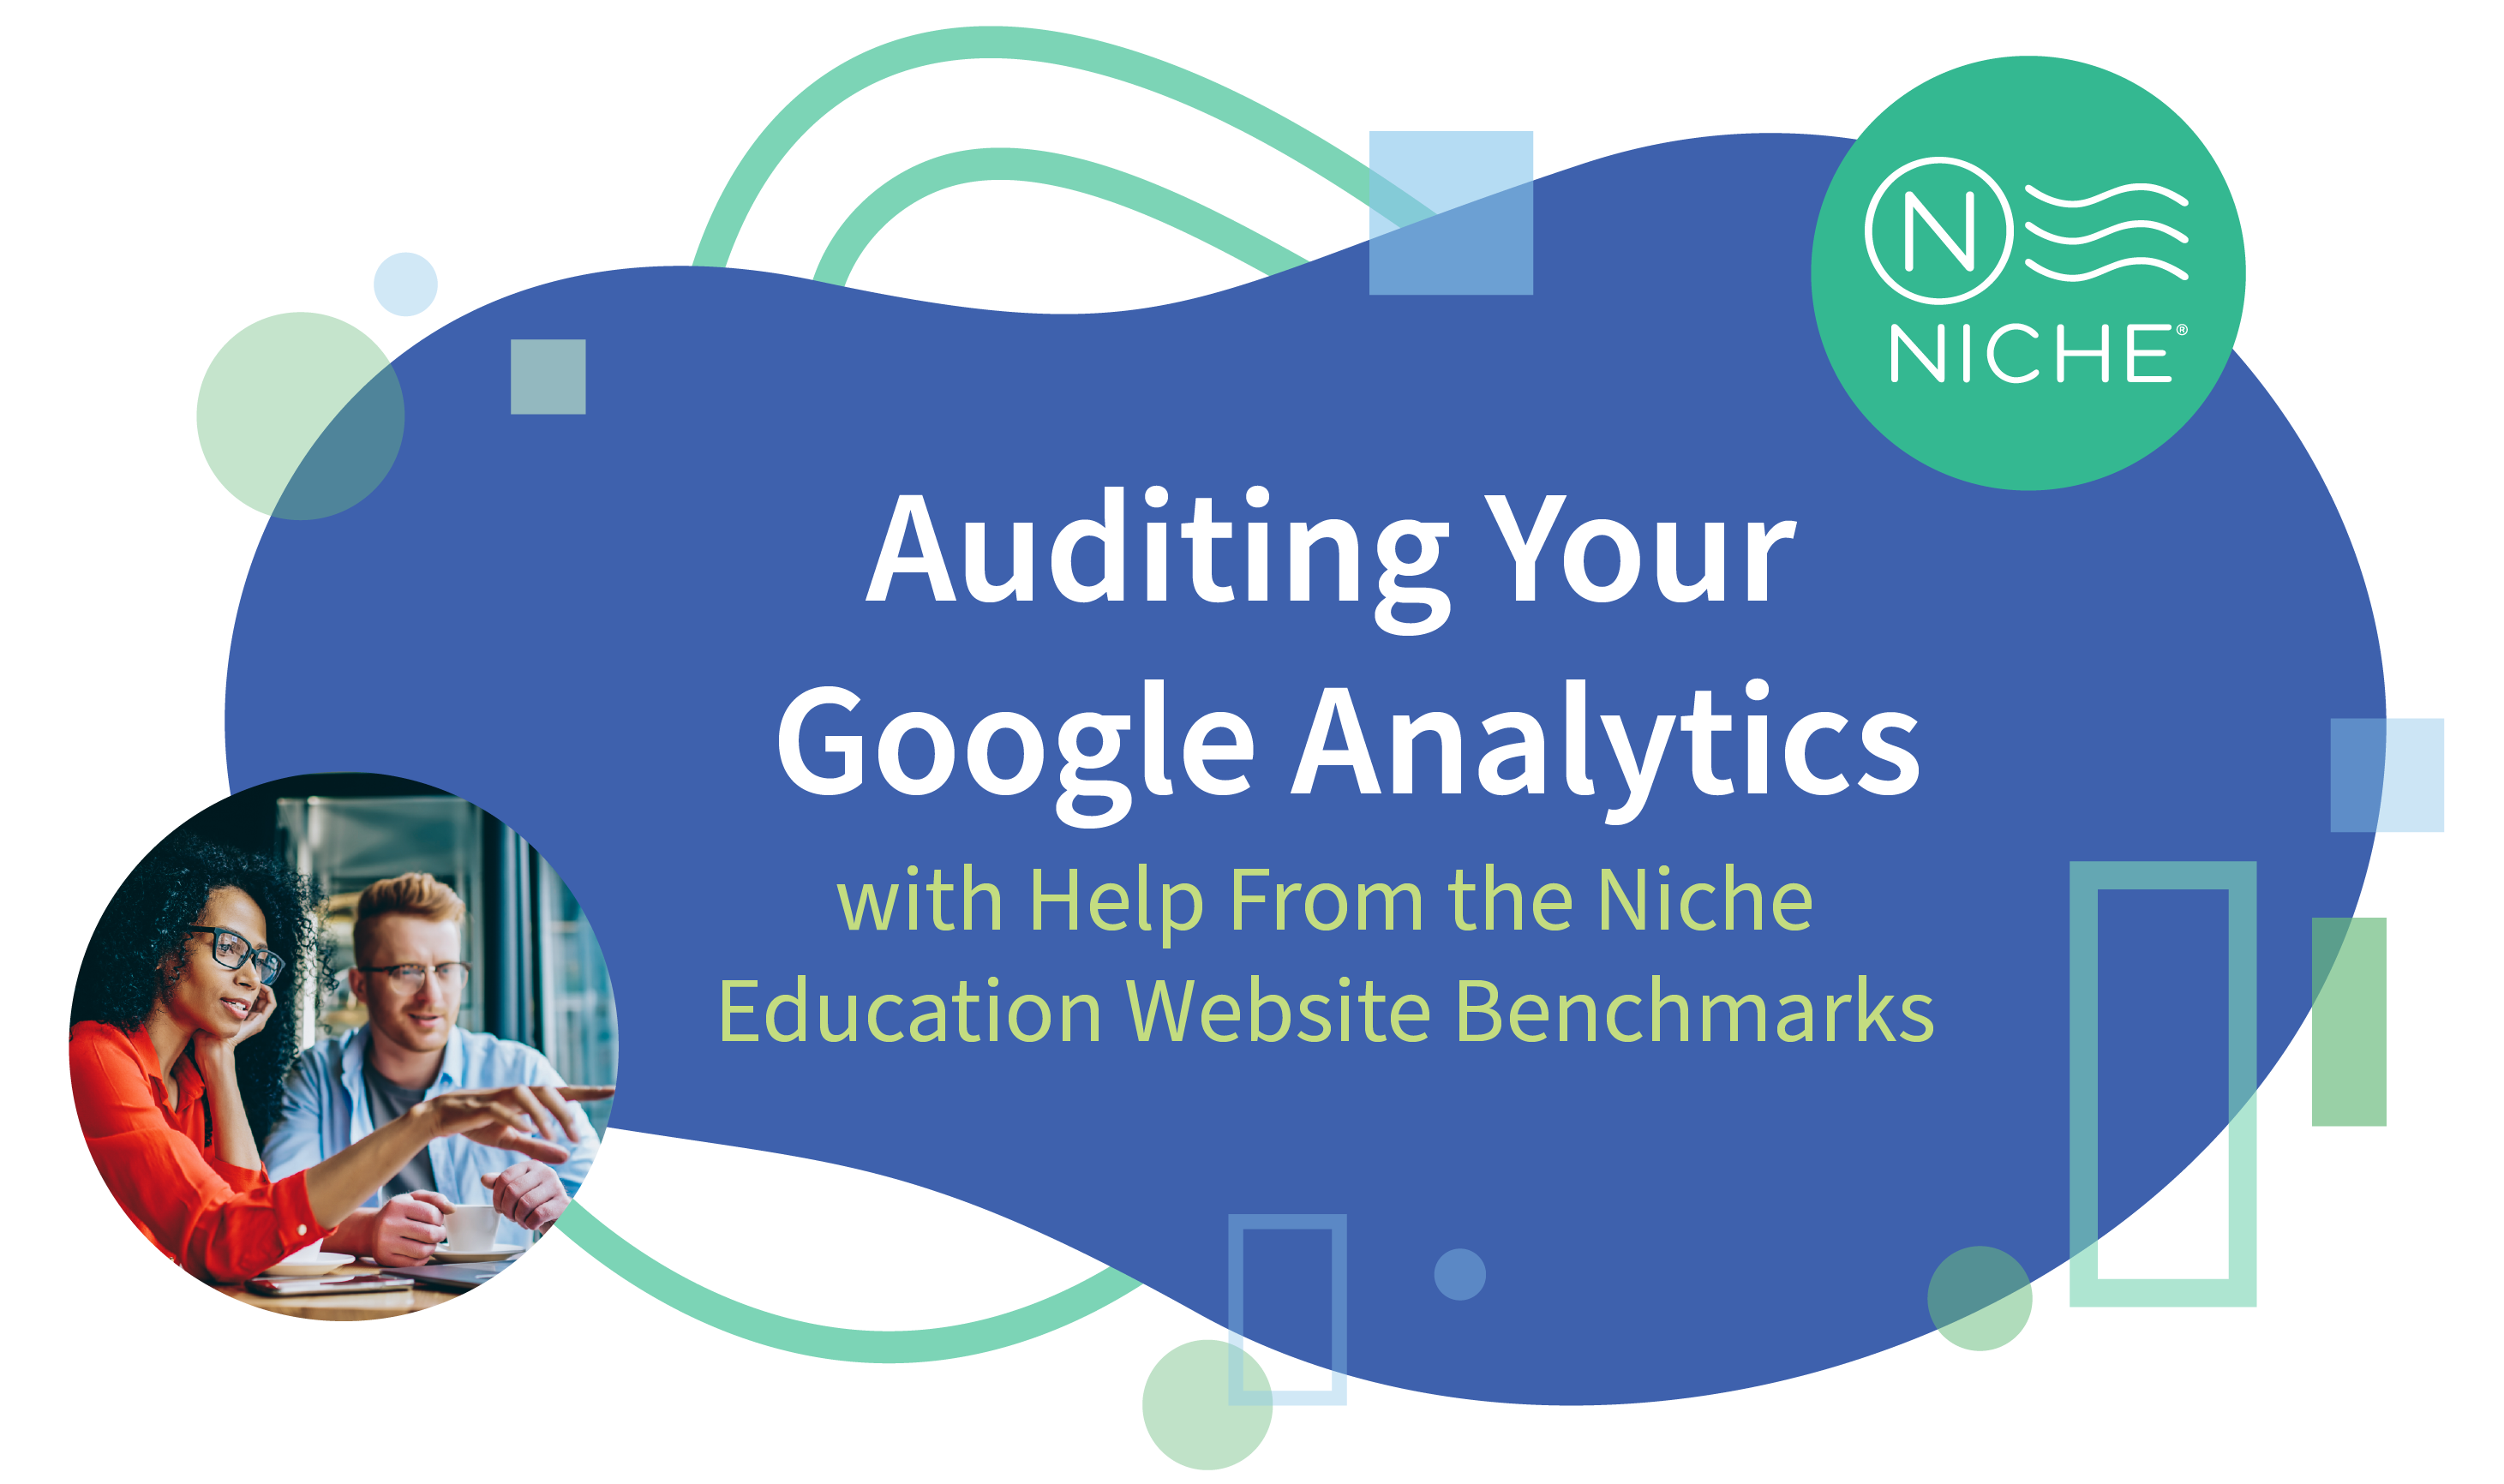 Auditing Your Google Analytics with Help From the Niche Education Website Benchmarks